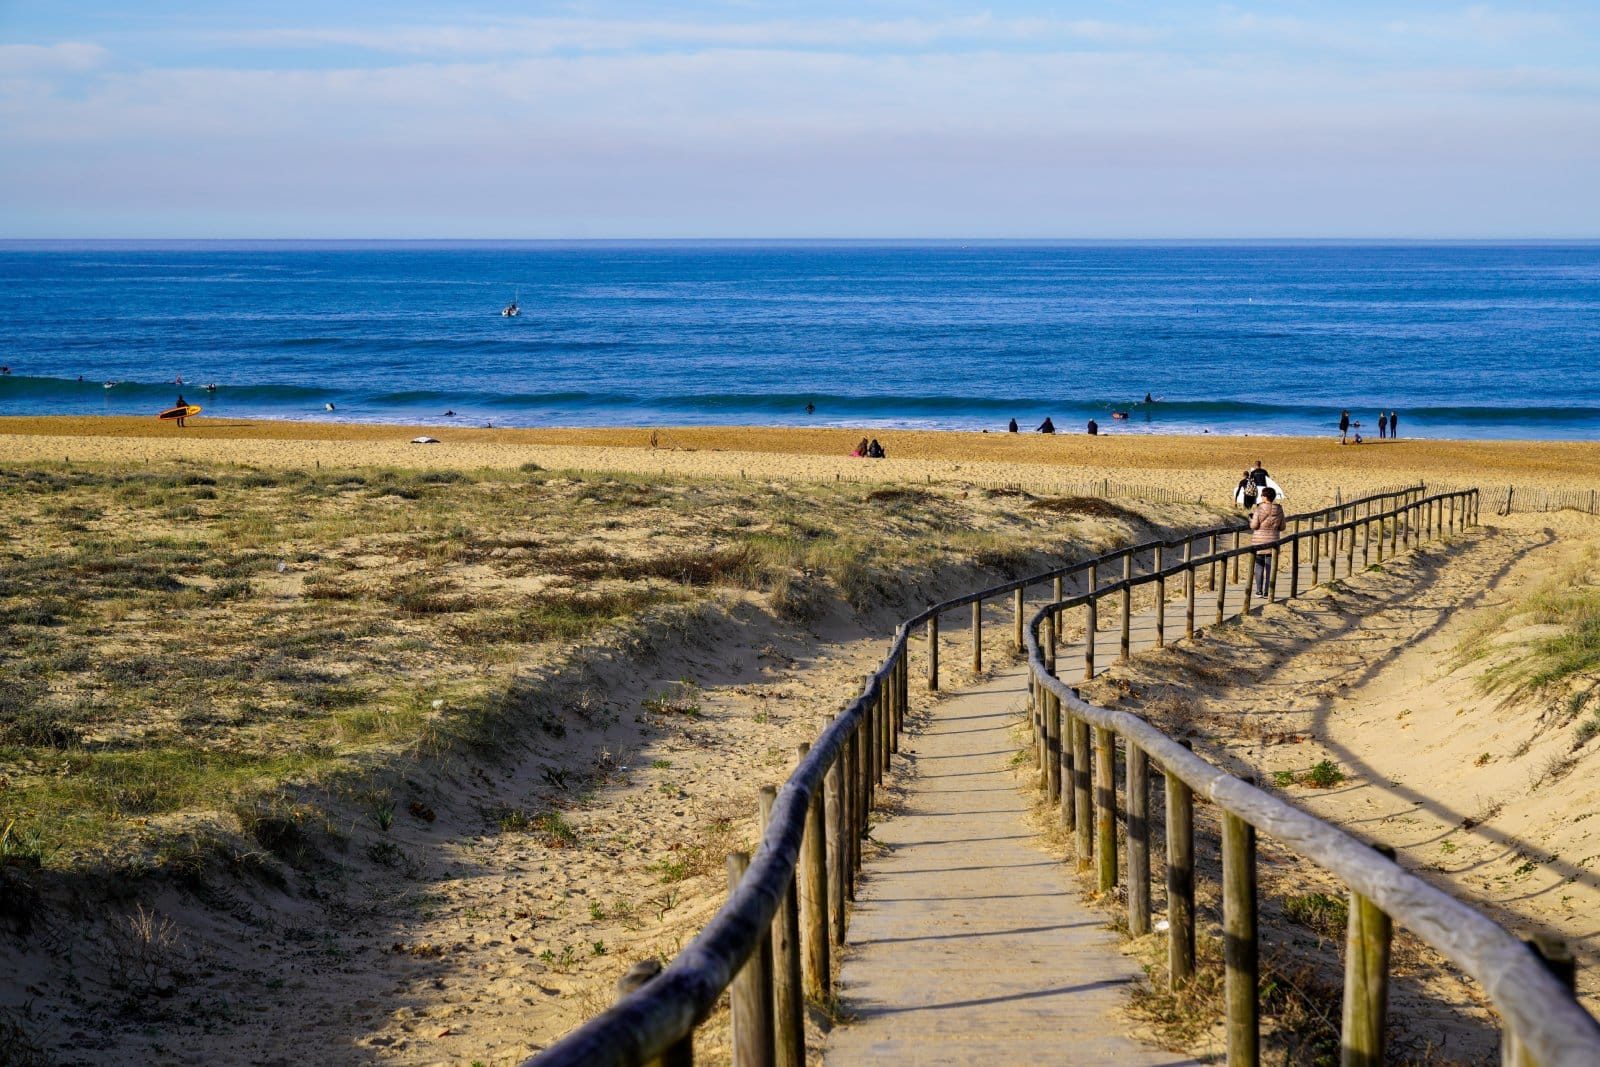 <p class="wp-caption-text">Image Credit: Shutterstock / sylv1rob1</p>  <p>Bienvenue à Hossegor, the European mecca of surfing. With its epic beach breaks and world-class barrels, this legendary spot attracts surfers from all over the globe. Whether you’re ripping up the lip or getting shacked in the barrel, Hossegor offers up endless waves and endless stoke.</p>